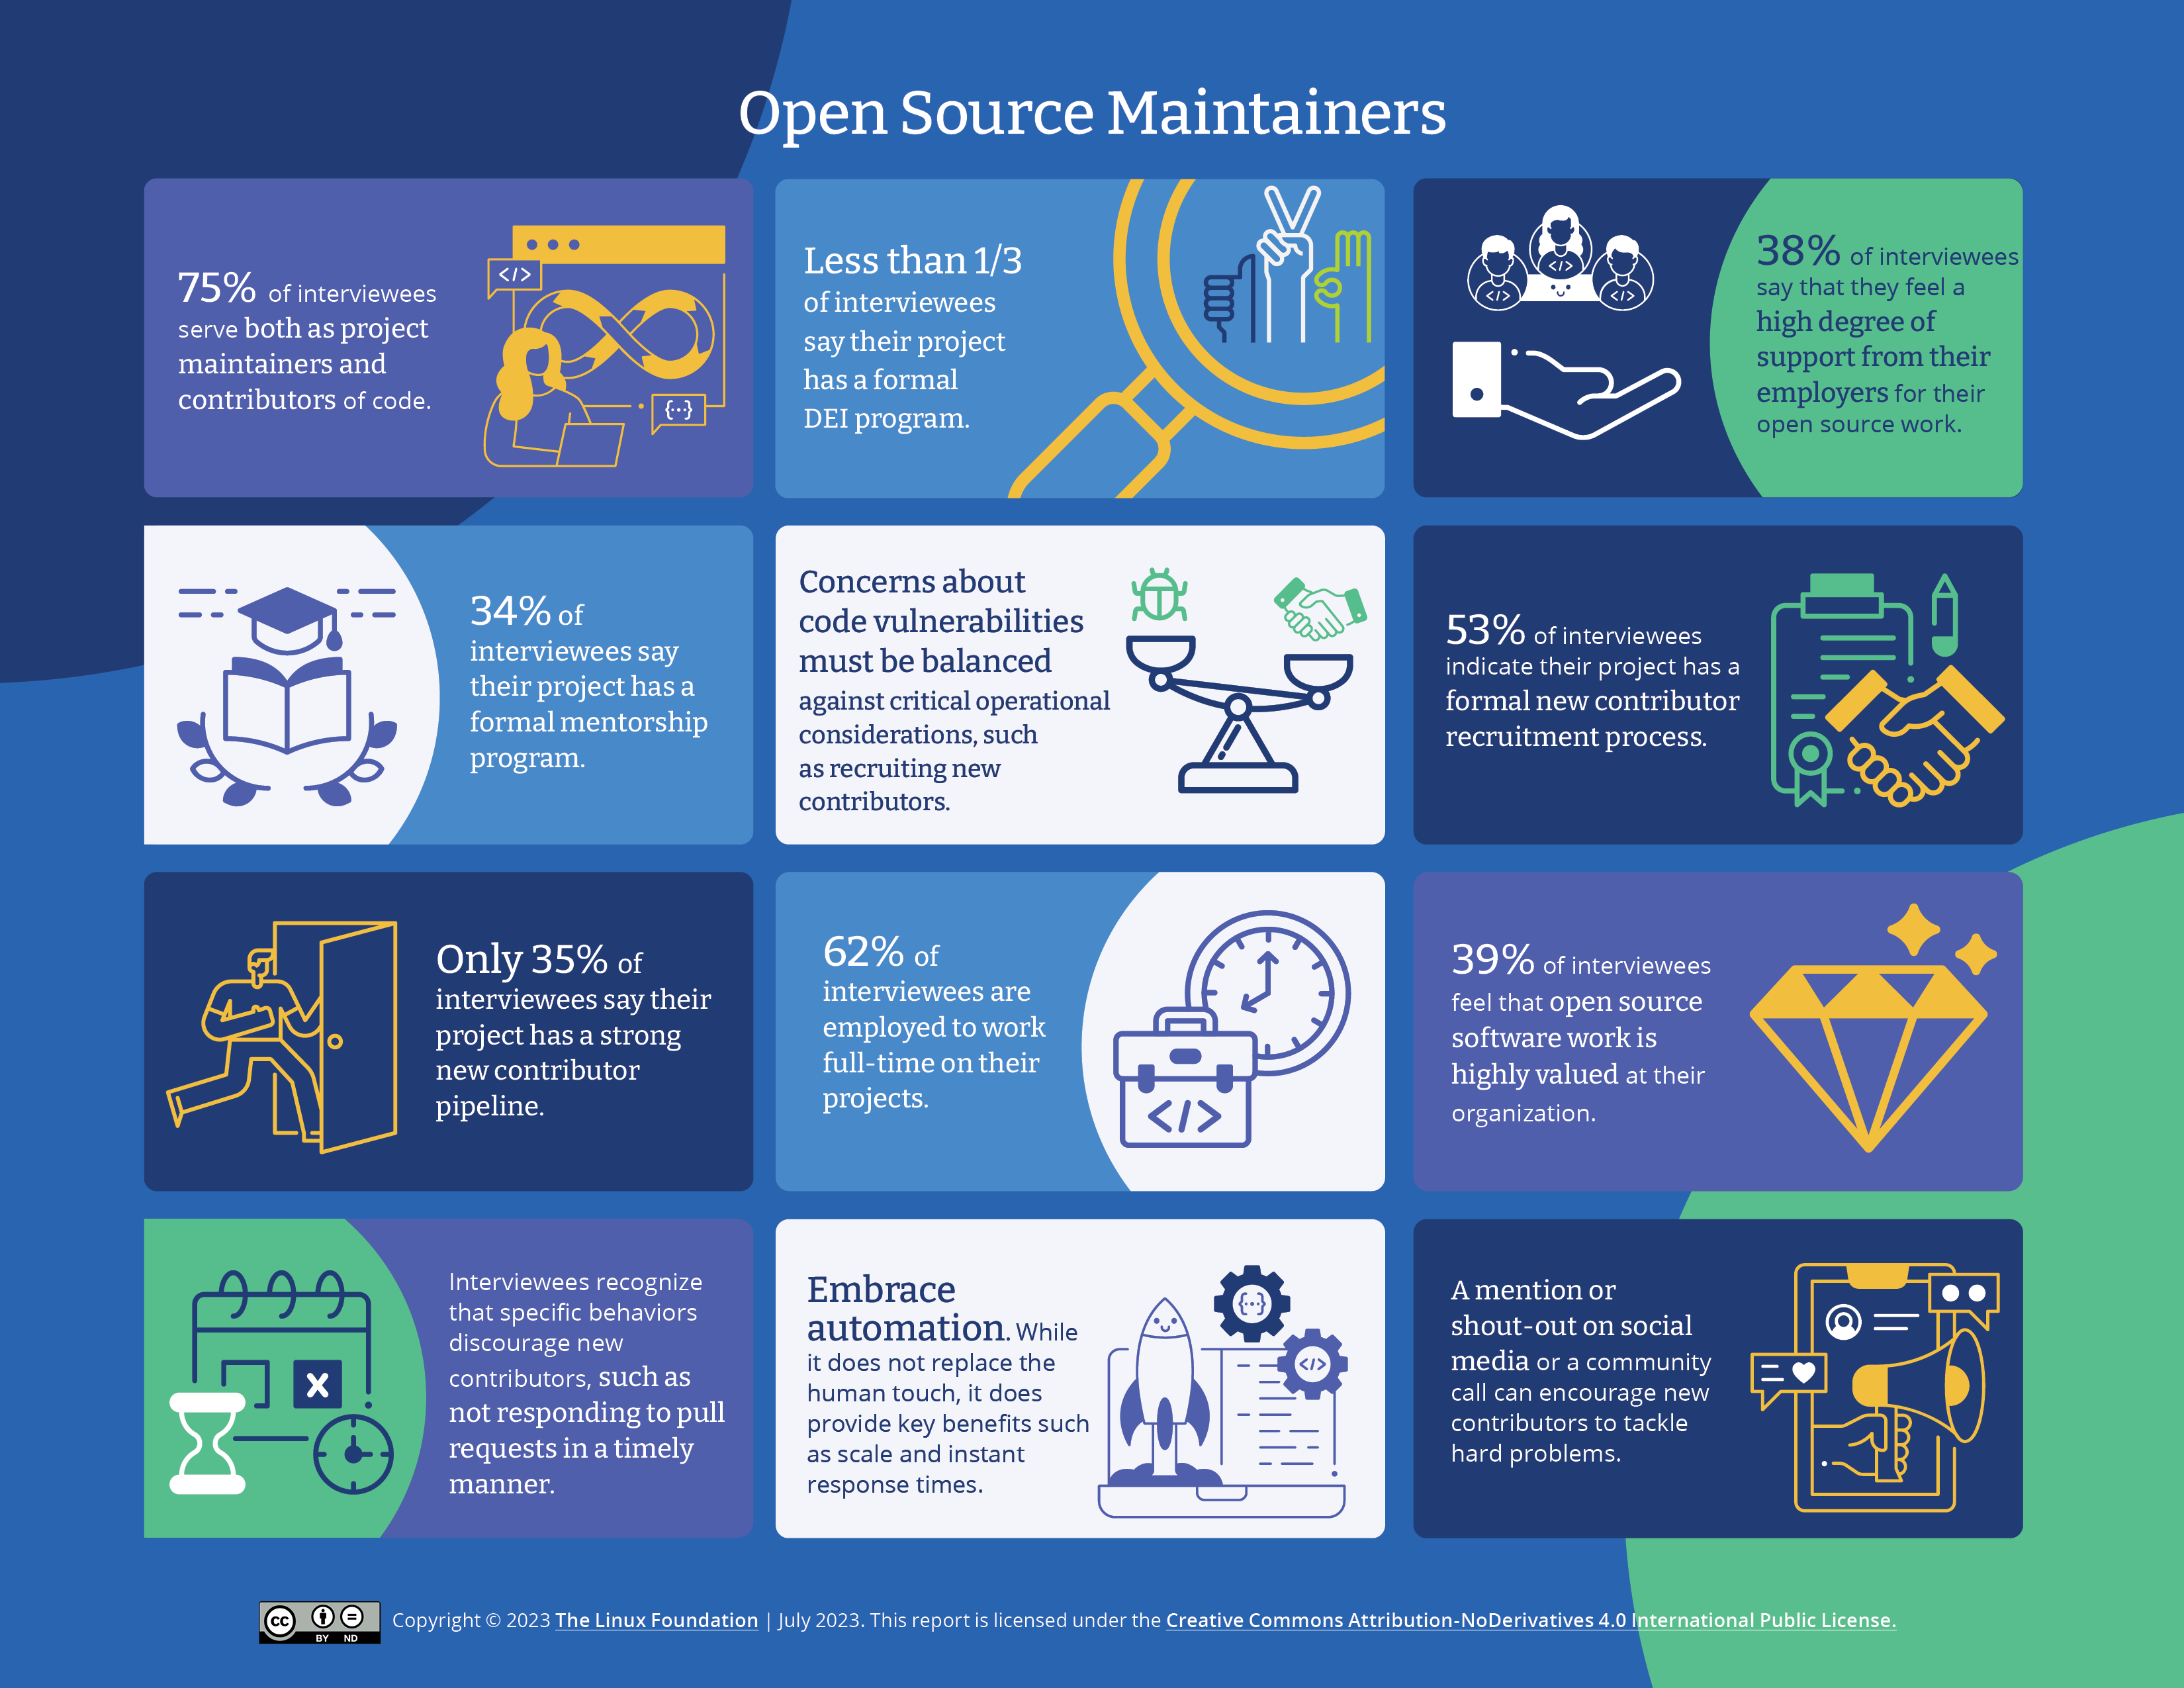 Open Source Maintainers Featured Image 2